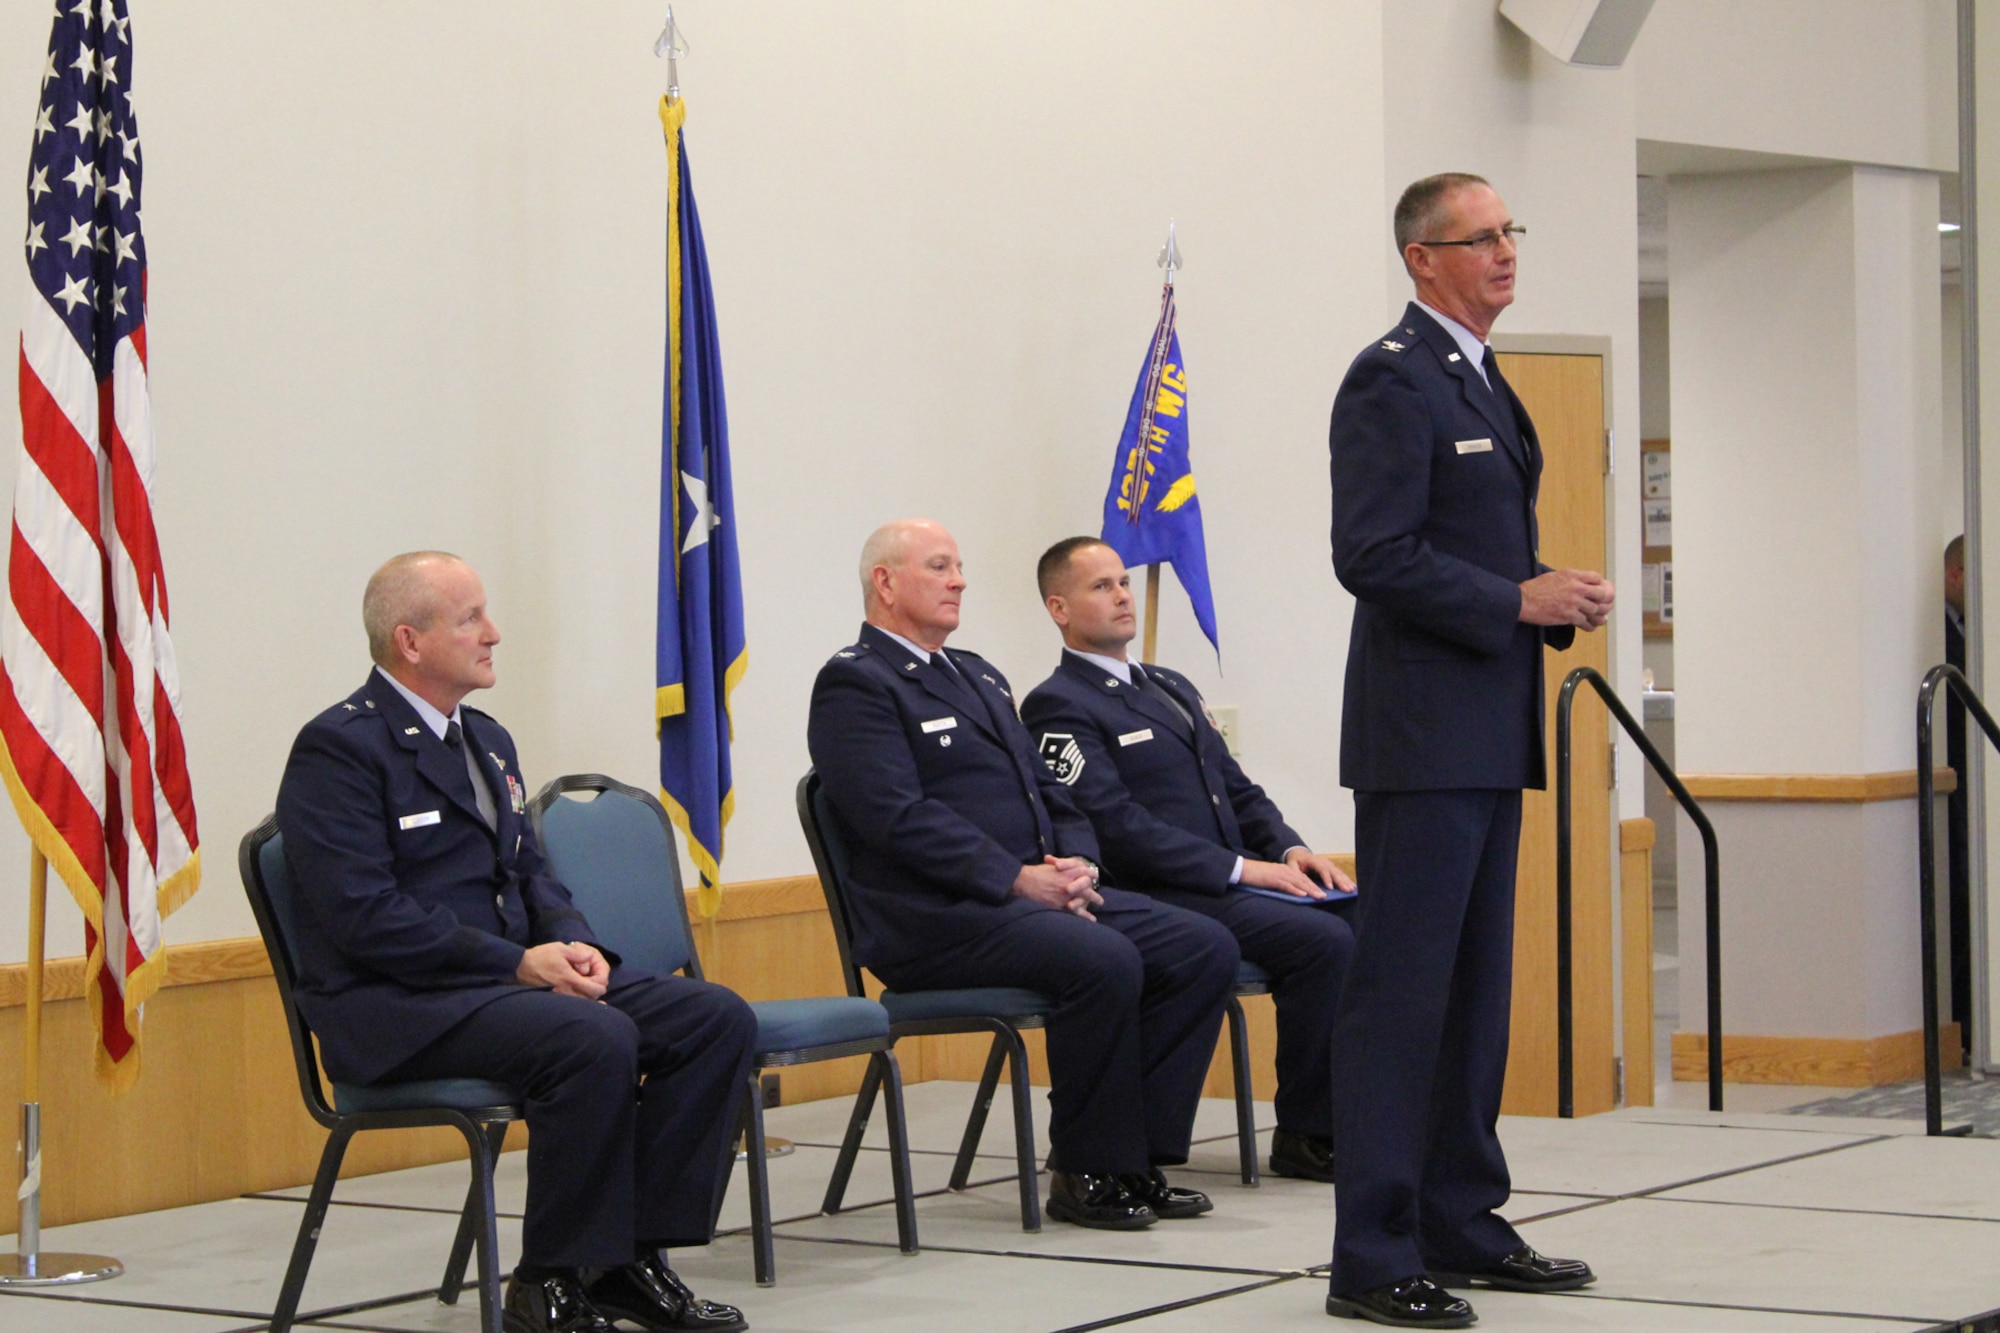 Col. Mark Manor, 127th Medical Group commander, addresses the audience at the transfer of command ceremony for the 127th Wing Medical Group at Selfridge Air National Guard Base, Michigan, October 18, 2015. (U.S. Air National Guard photo by TSgt. Dan Heaton/released)